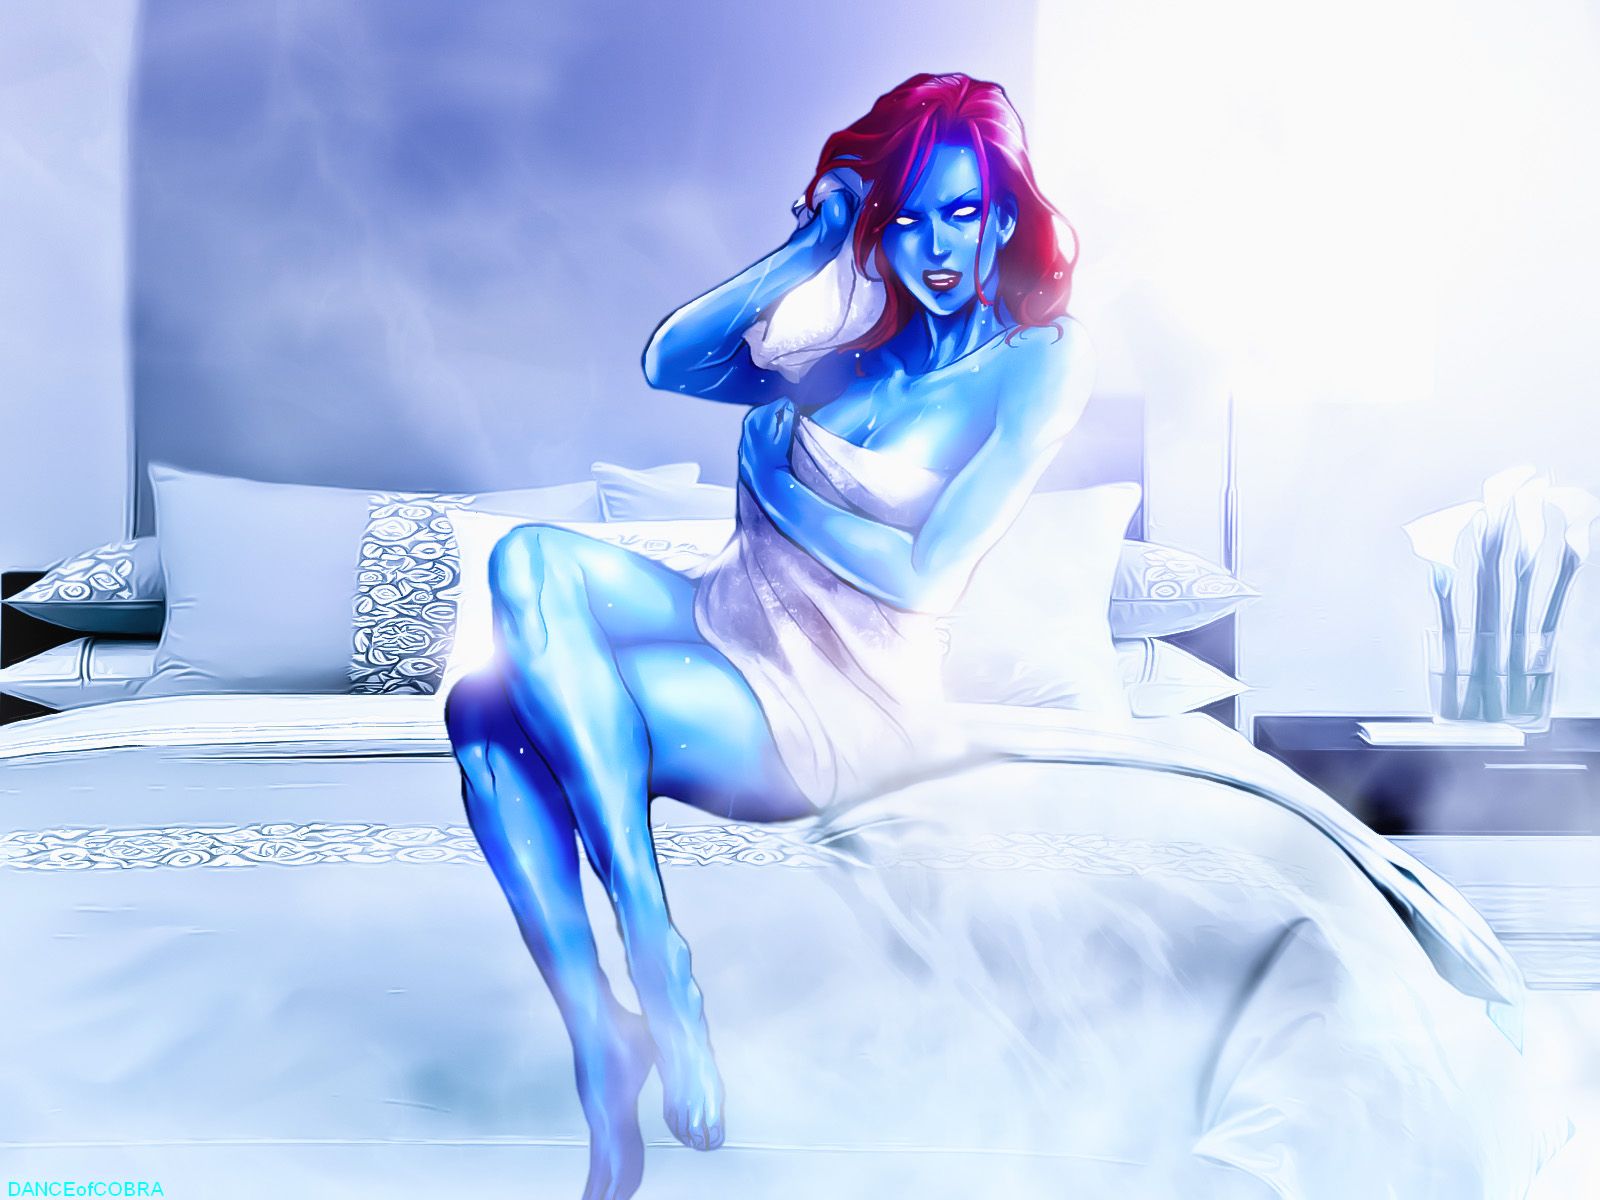 Mystique in bed, with red hair, white eyes, and a towel. An image related to the X-Men comics.